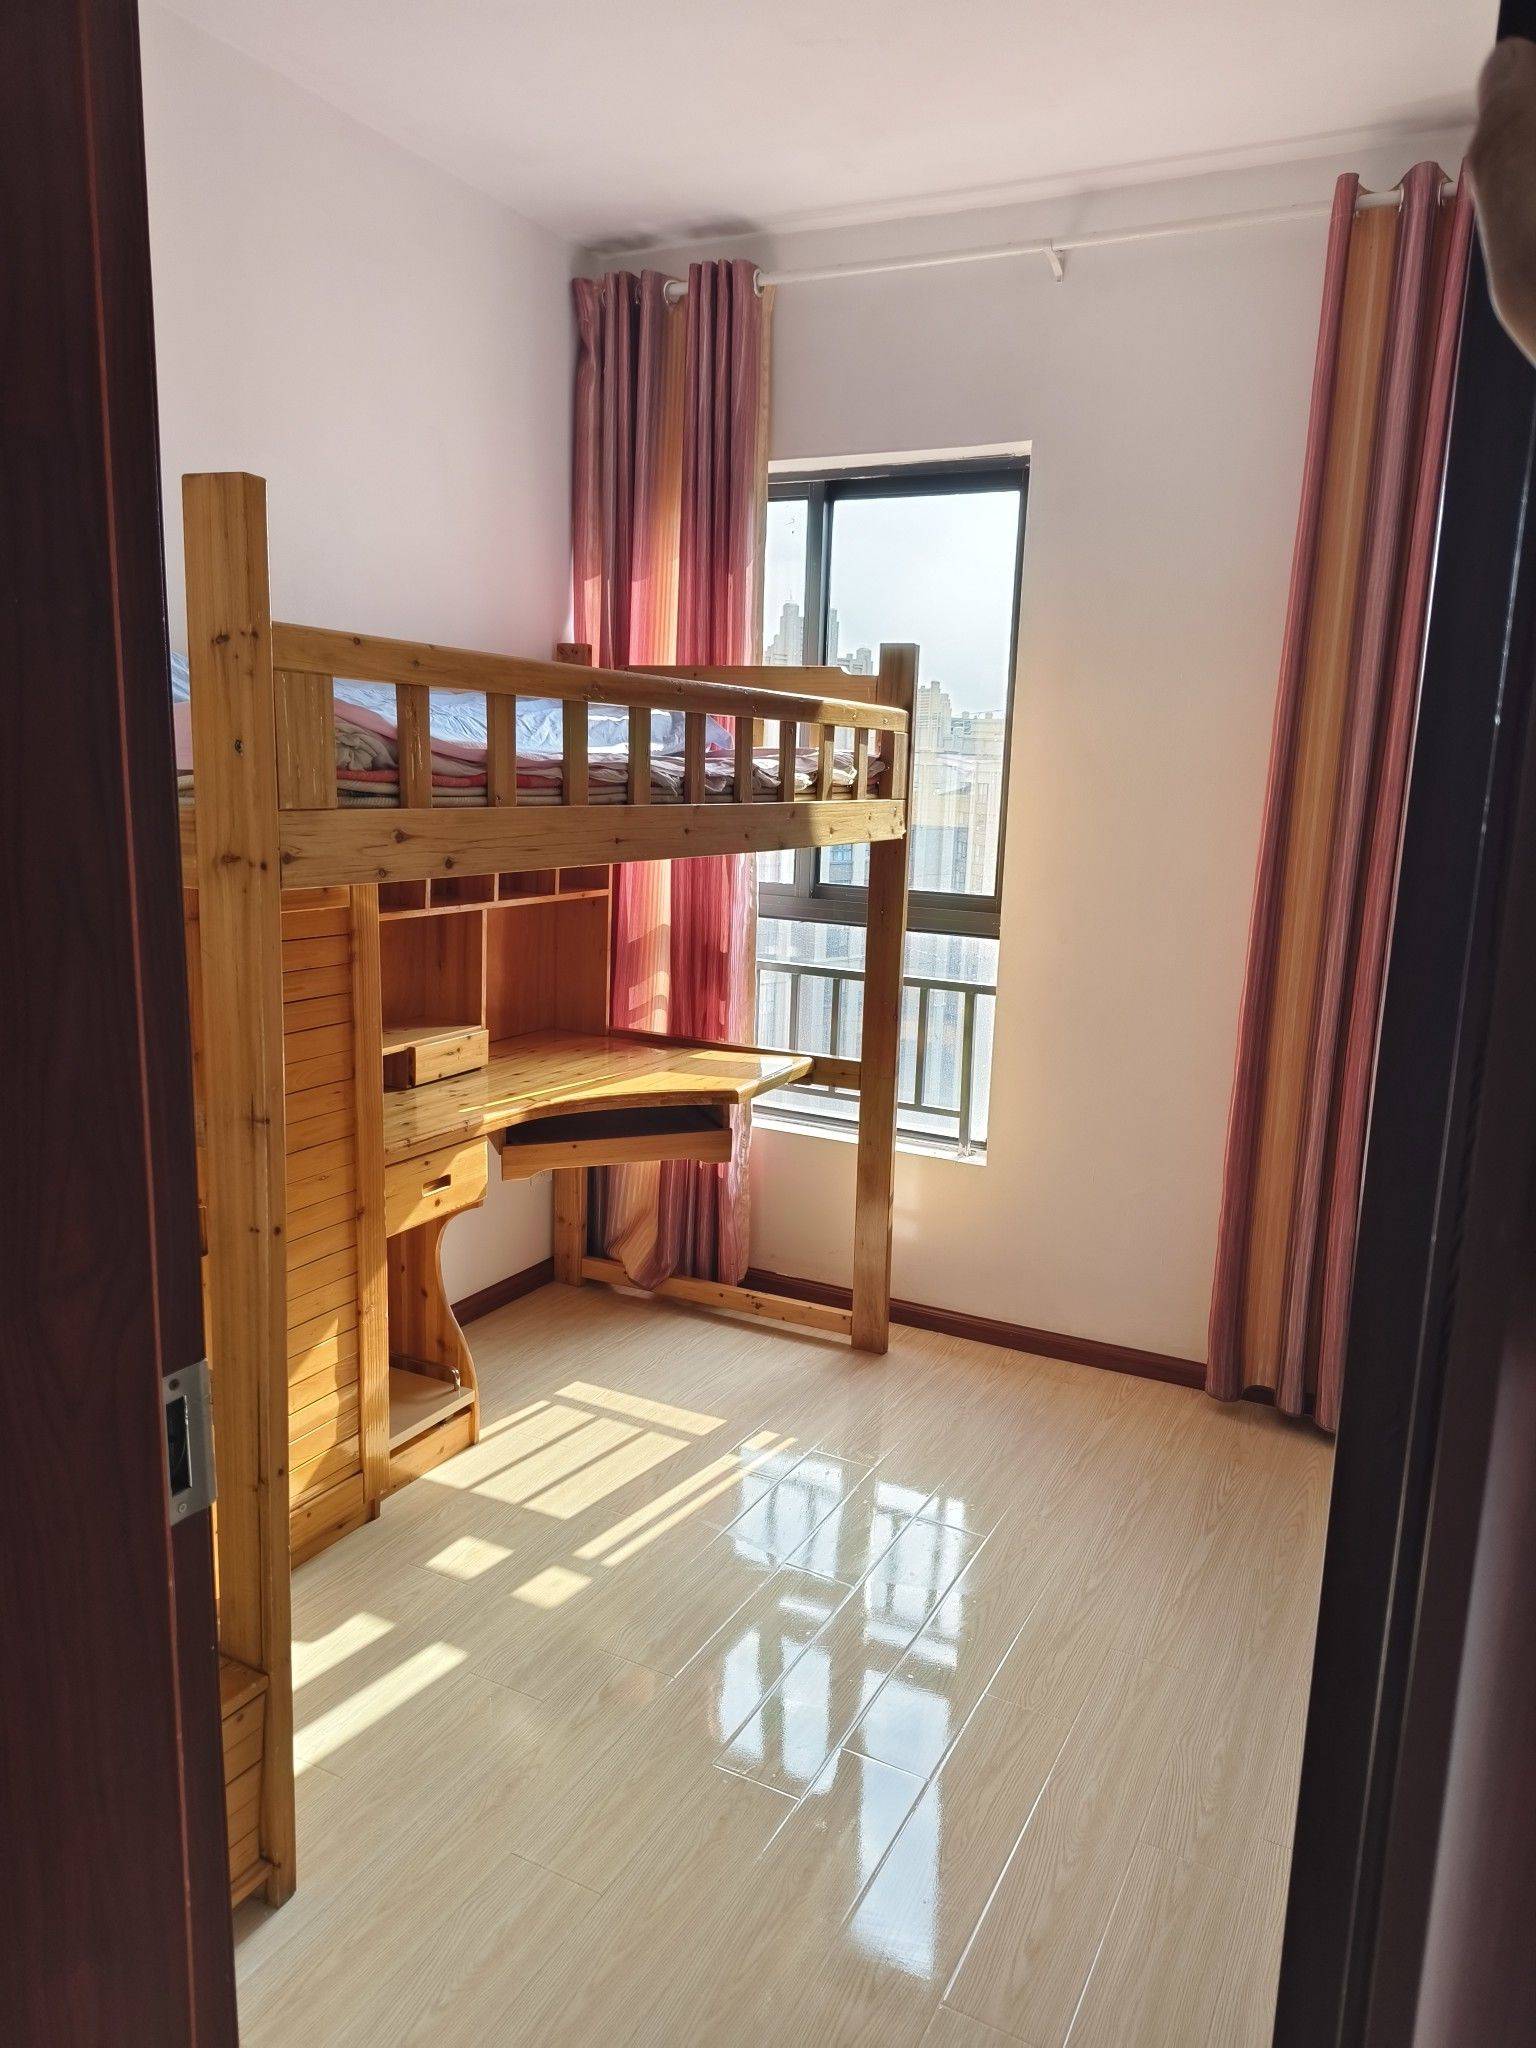 Kunming-Chenggong-Cozy Home,Clean&Comfy,No Gender Limit,Hustle & Bustle,Chilled,LGBTQ Friendly